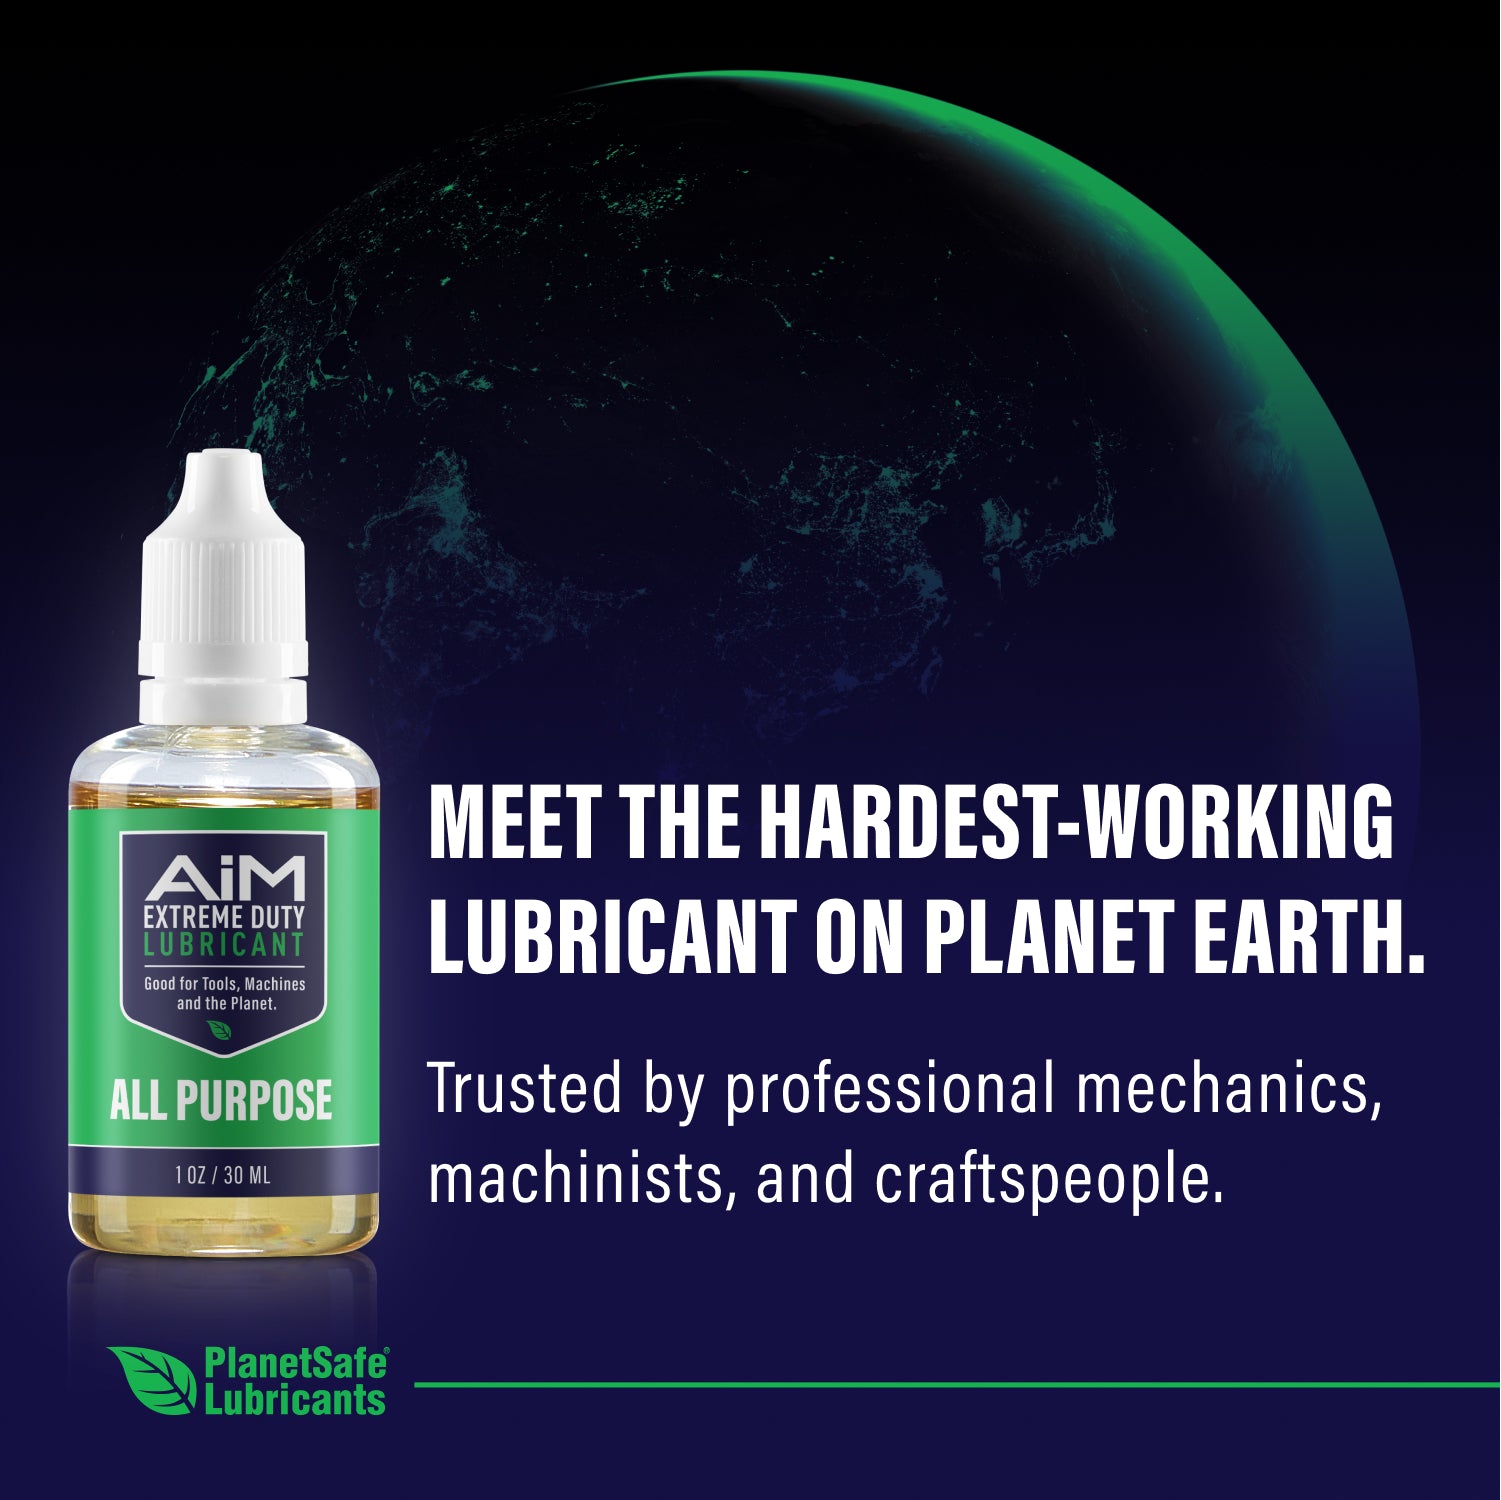 Best All Purpose Lubricant - PlanetSafe AIM Extreme Duty Lubricant - rust remover - household garage - non-toxic - rust removal - tools chains hinges metal - WD40 Alternative